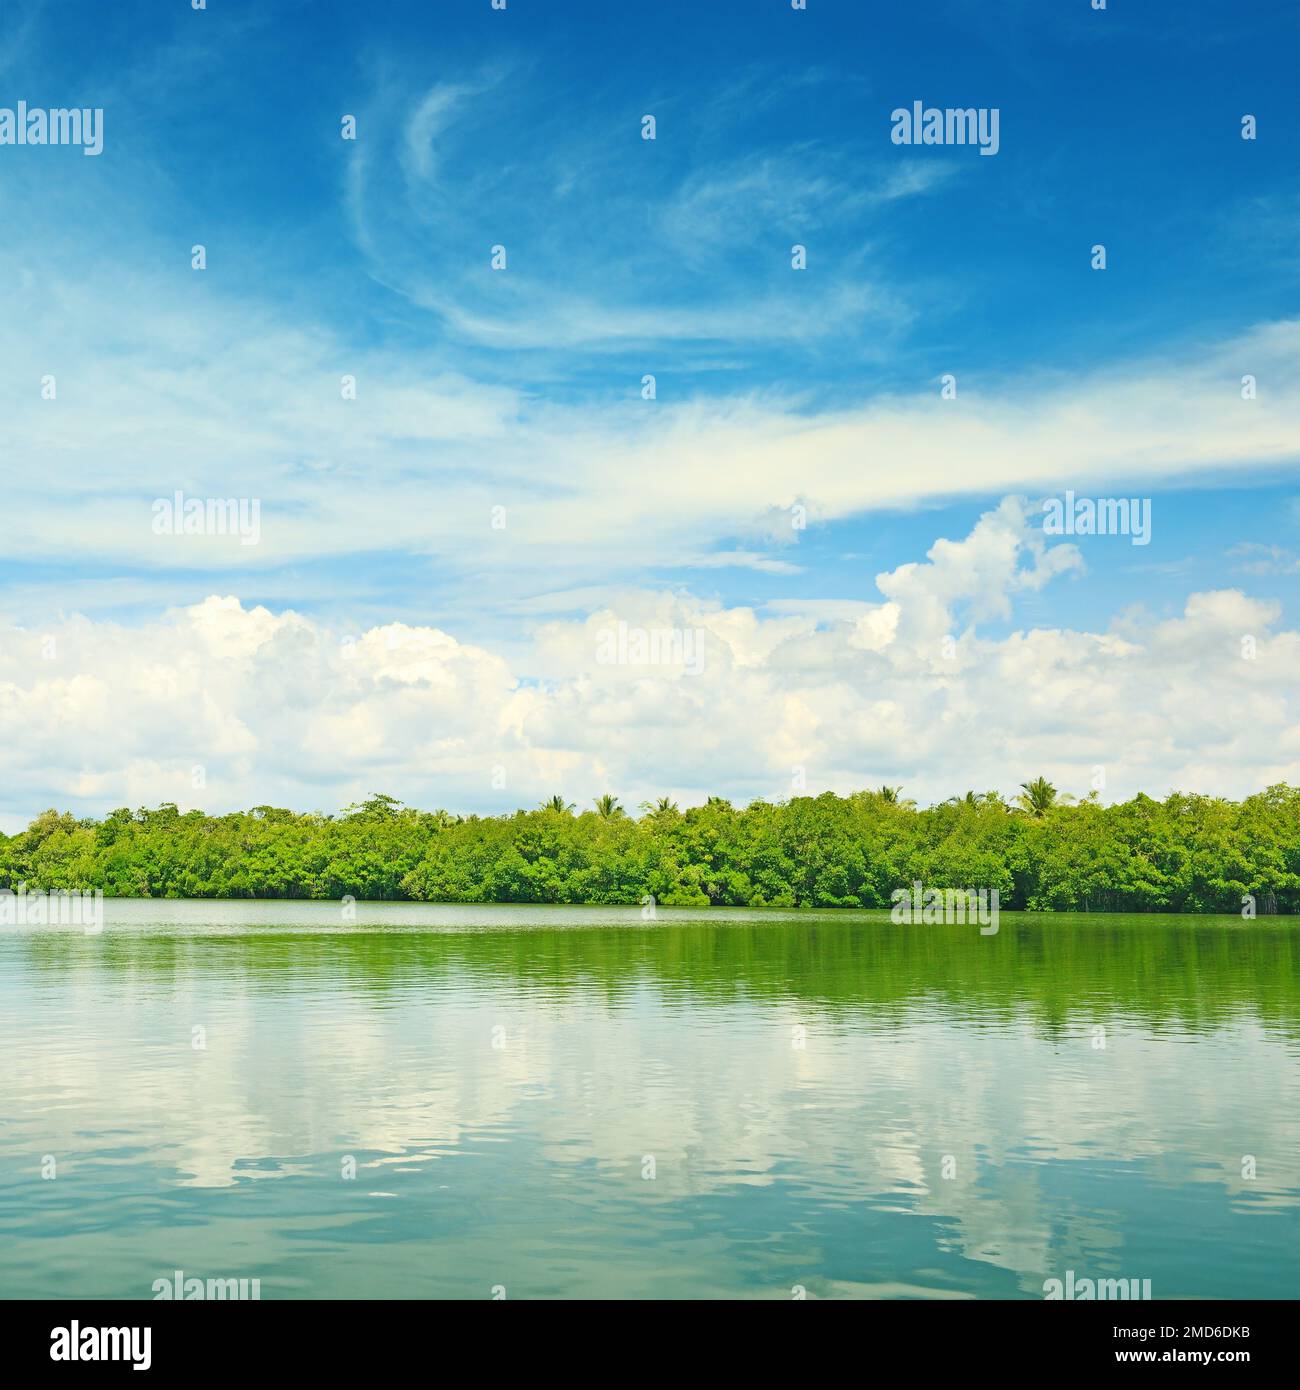 Equatorial mangroves in the lake Stock Photo